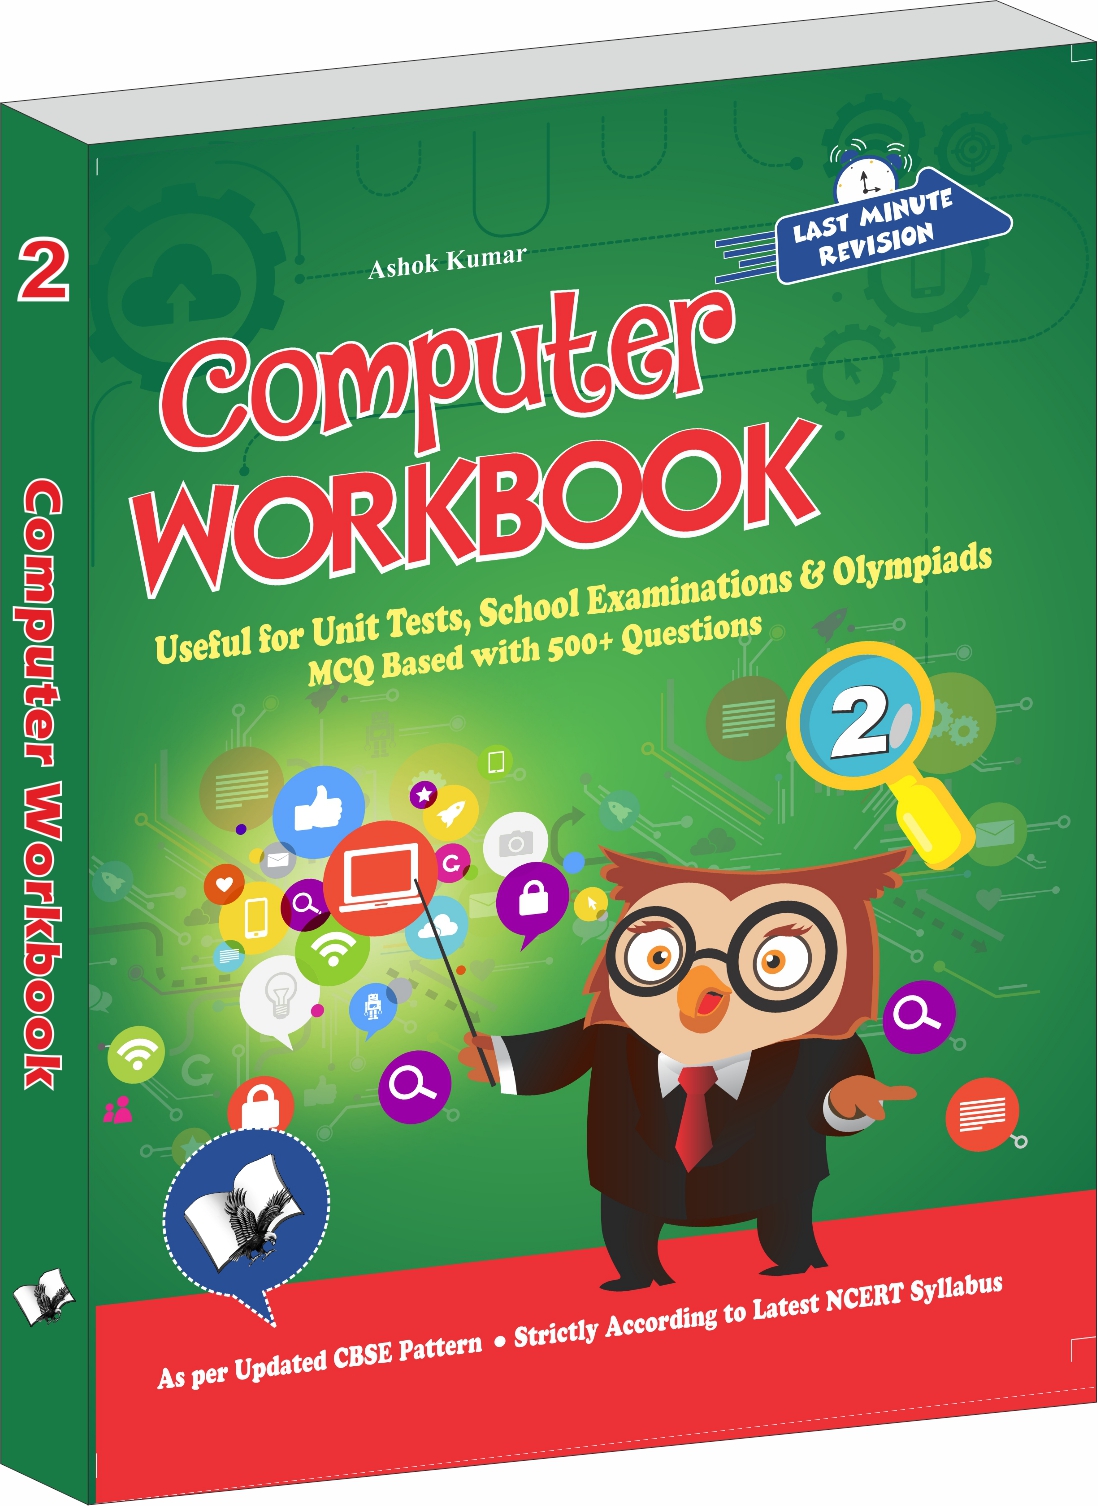 computer-workbook-class-2-useful-for-unit-tests-school-examinations-olympiads